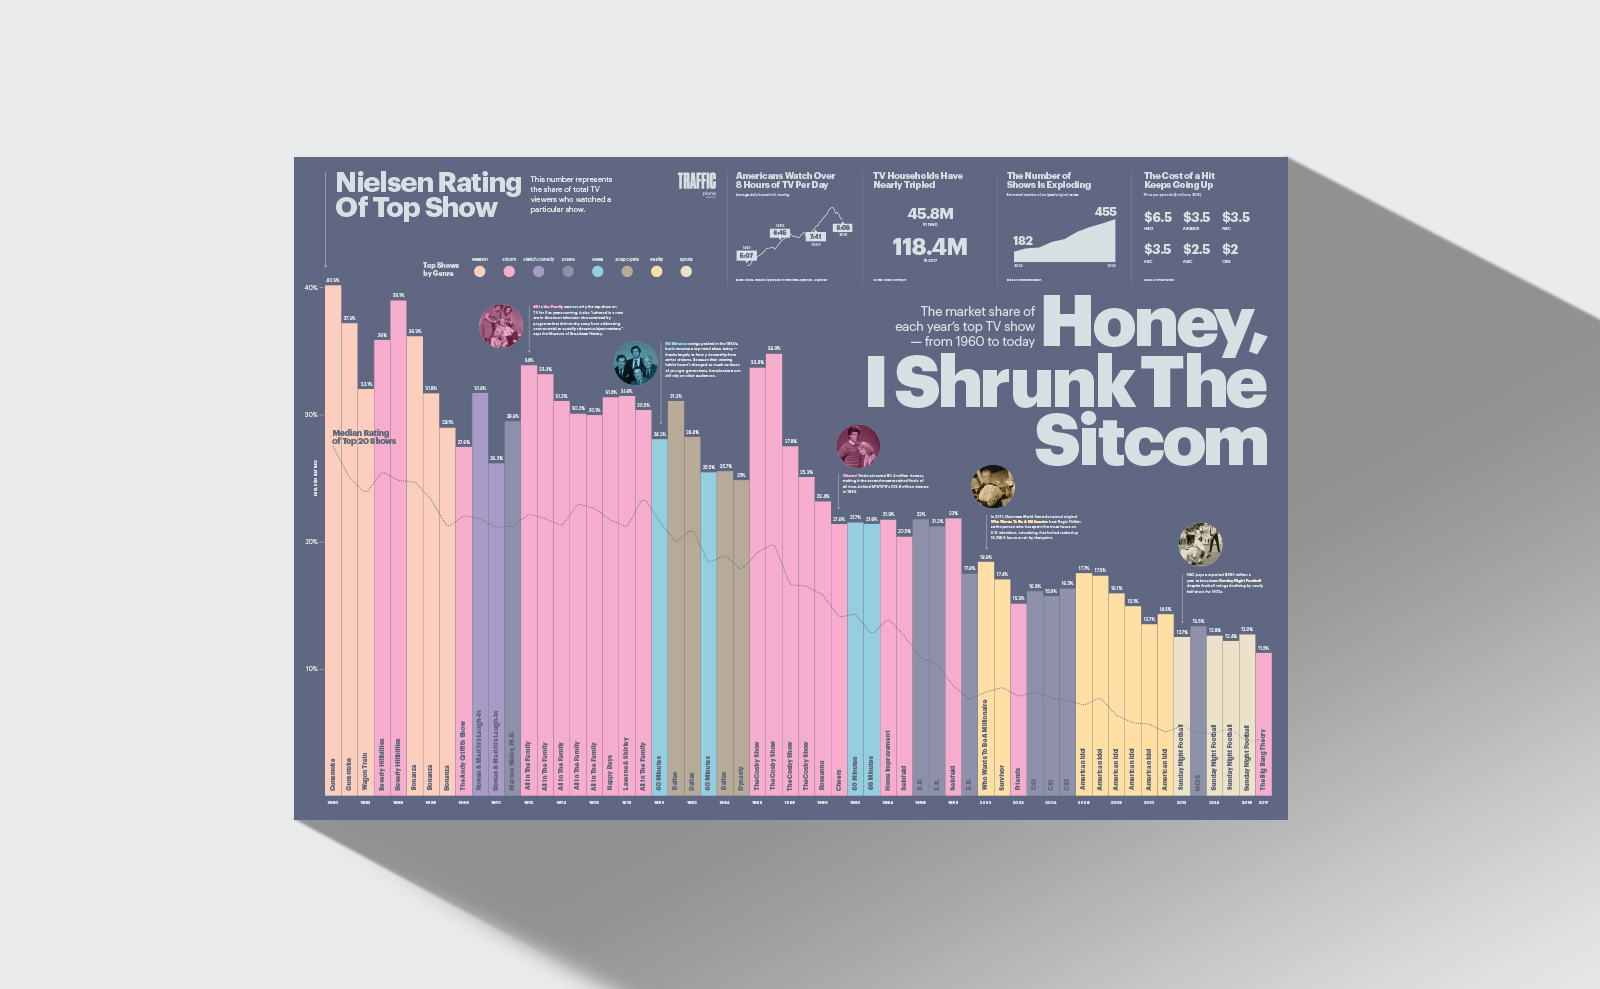 Honey I shrunk the sitcom Nielsen Rating of Top Shows Traffic magazine poster detail